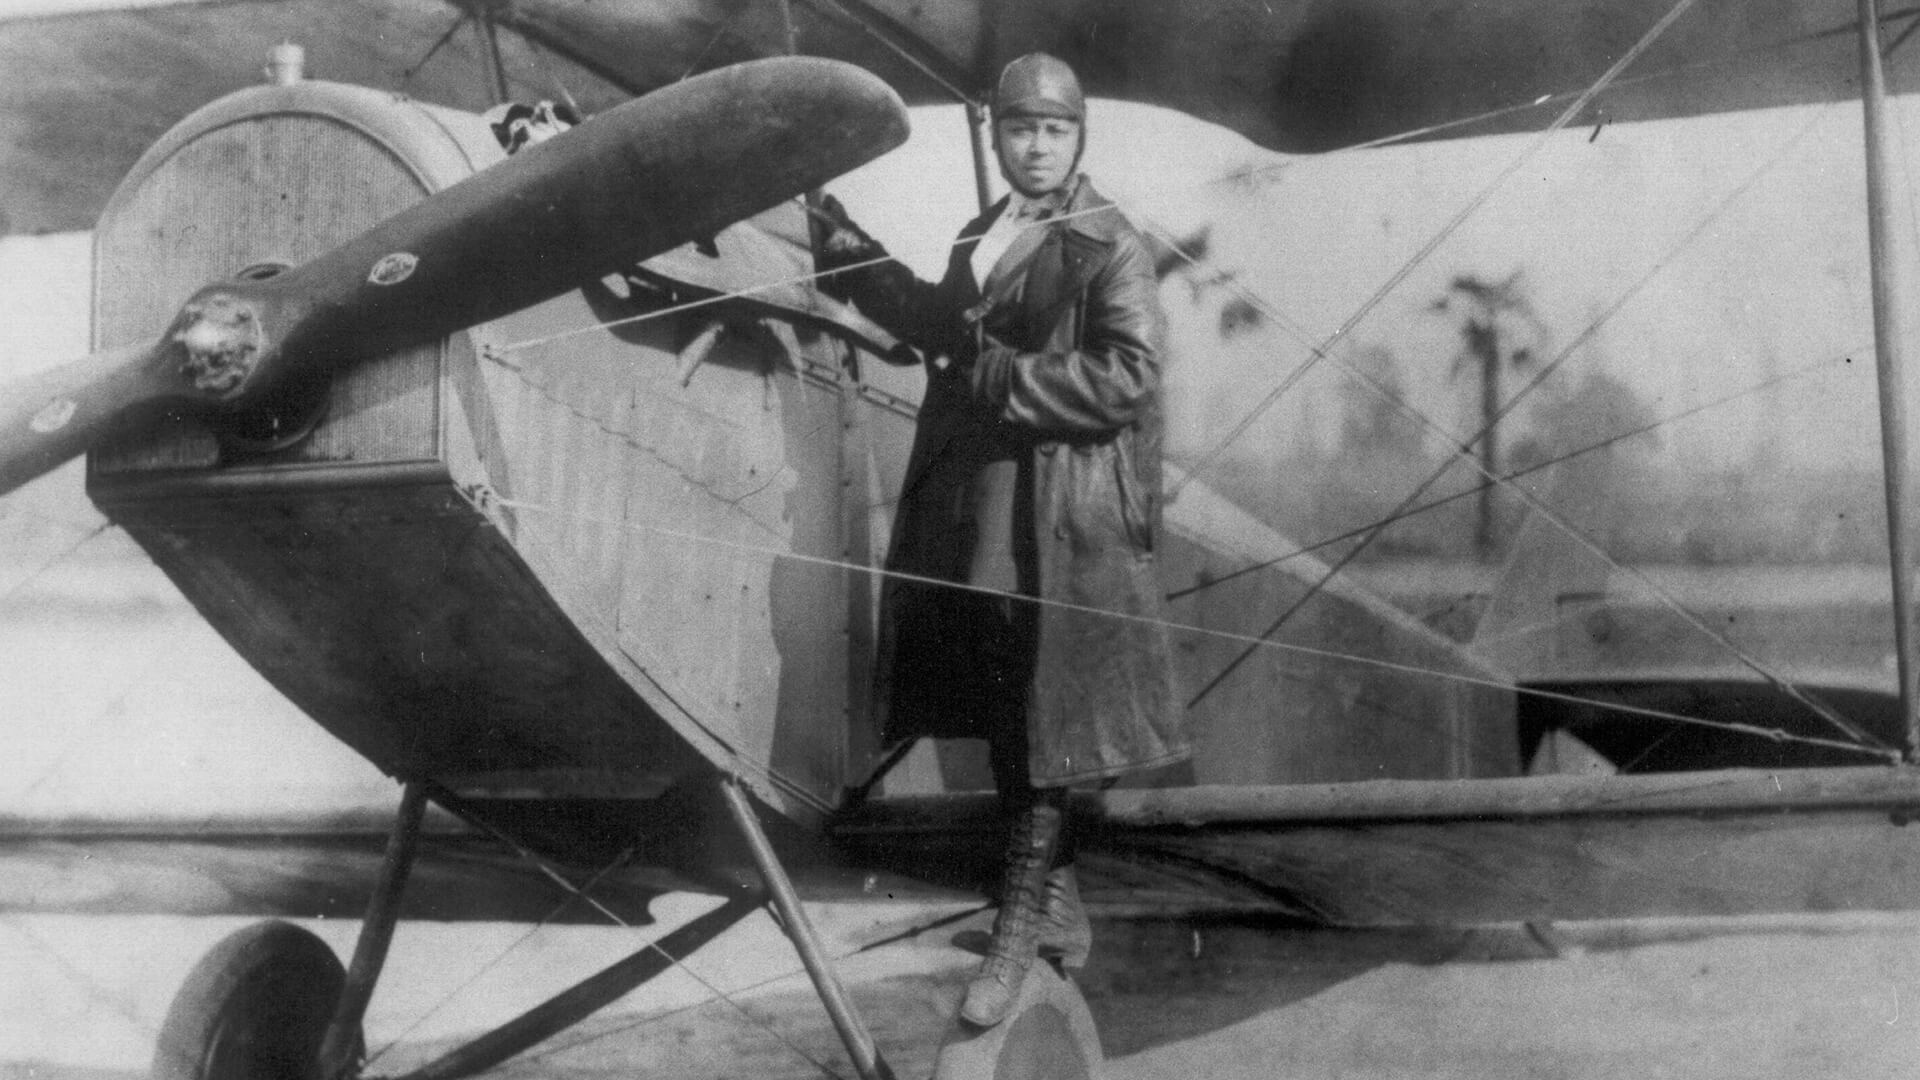 Discover the pioneering achievements of Bessie Coleman and Bernetta Adams, trailblazing aviators who defied odds to soar to new heights.